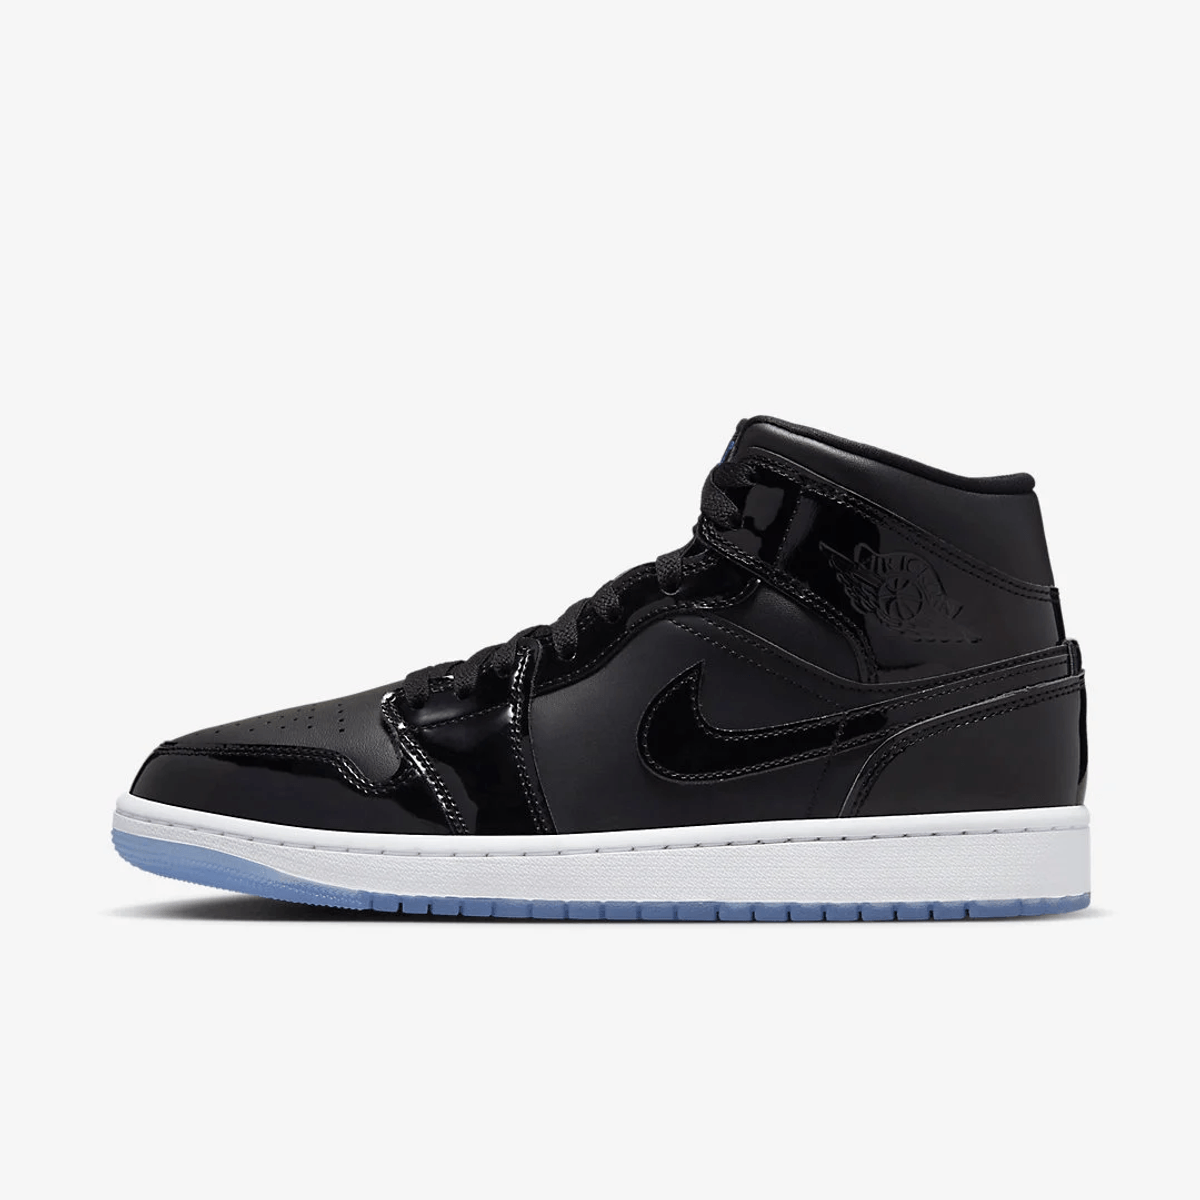 "Space Jam" Is Coming To The Air Jordan 1 Mid